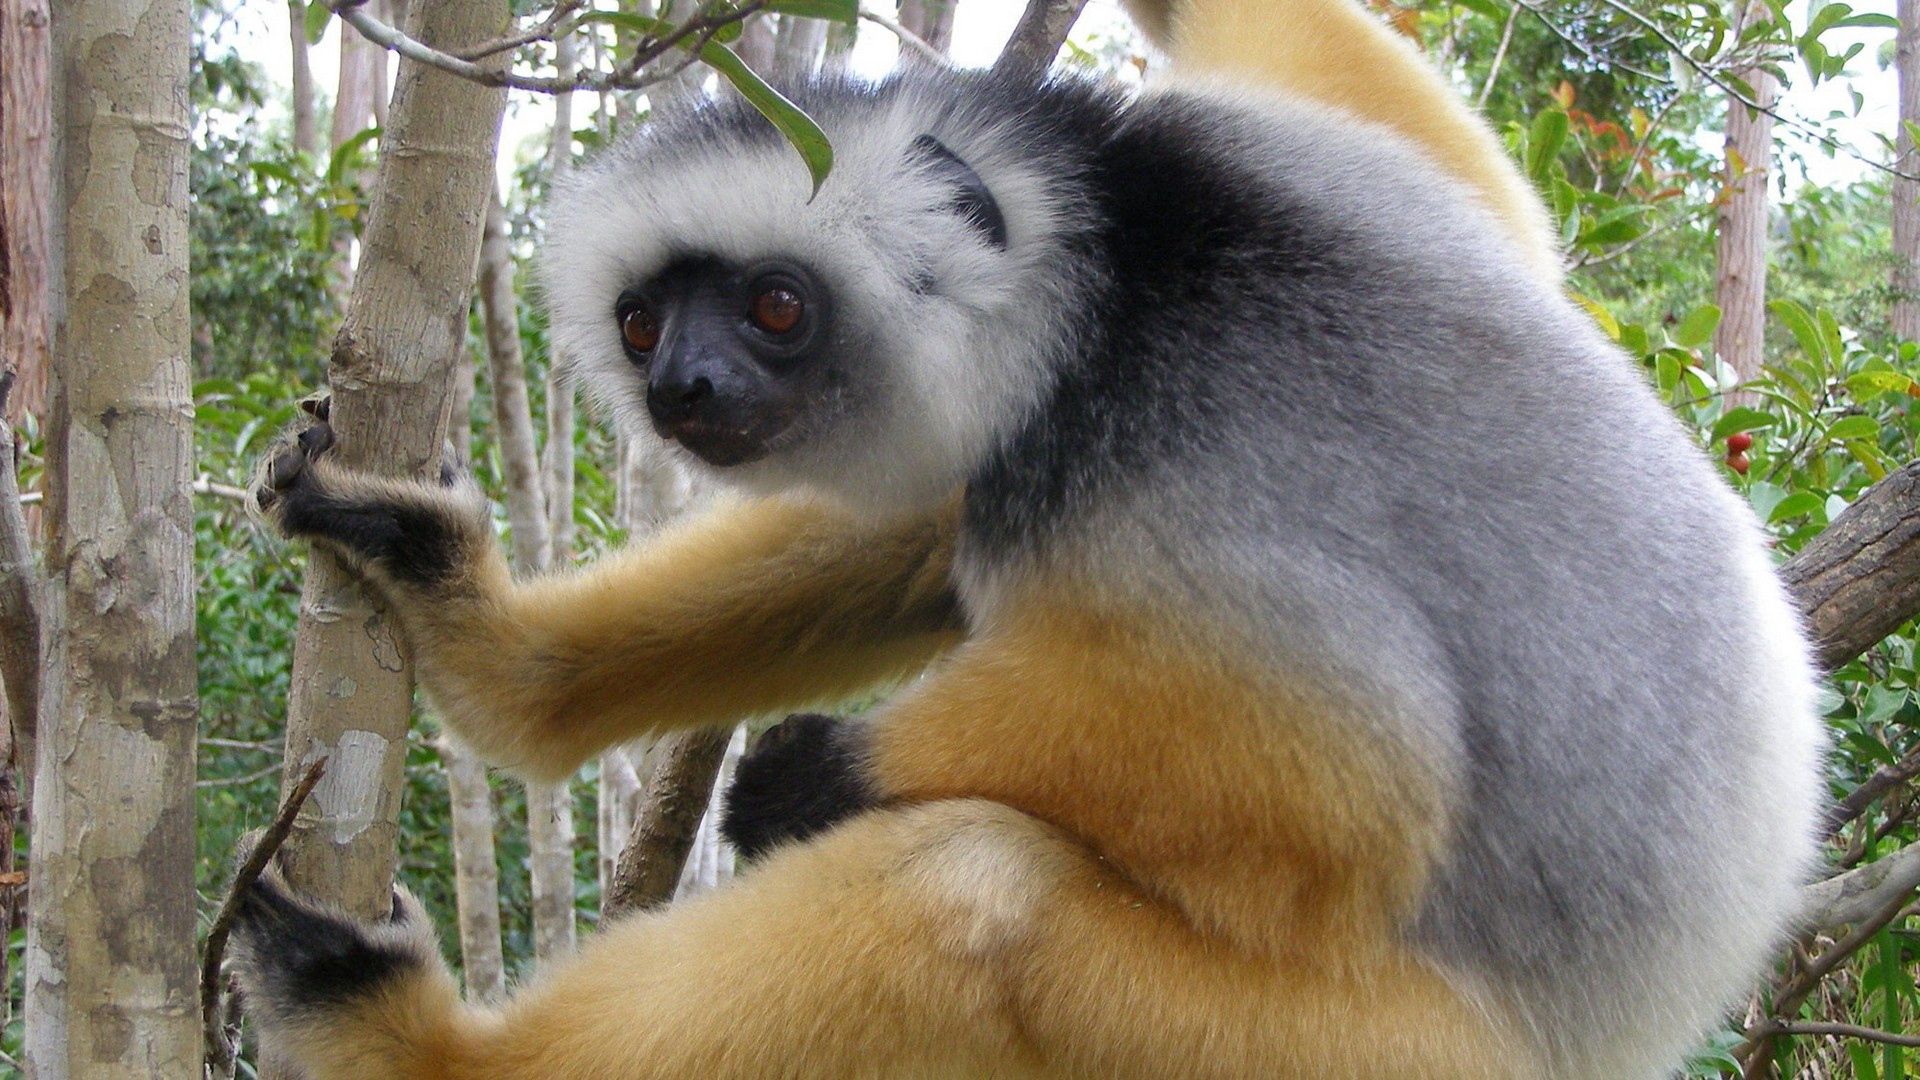 157718 download wallpaper animals, madagascar, branch, crawl, lemur screensavers and pictures for free